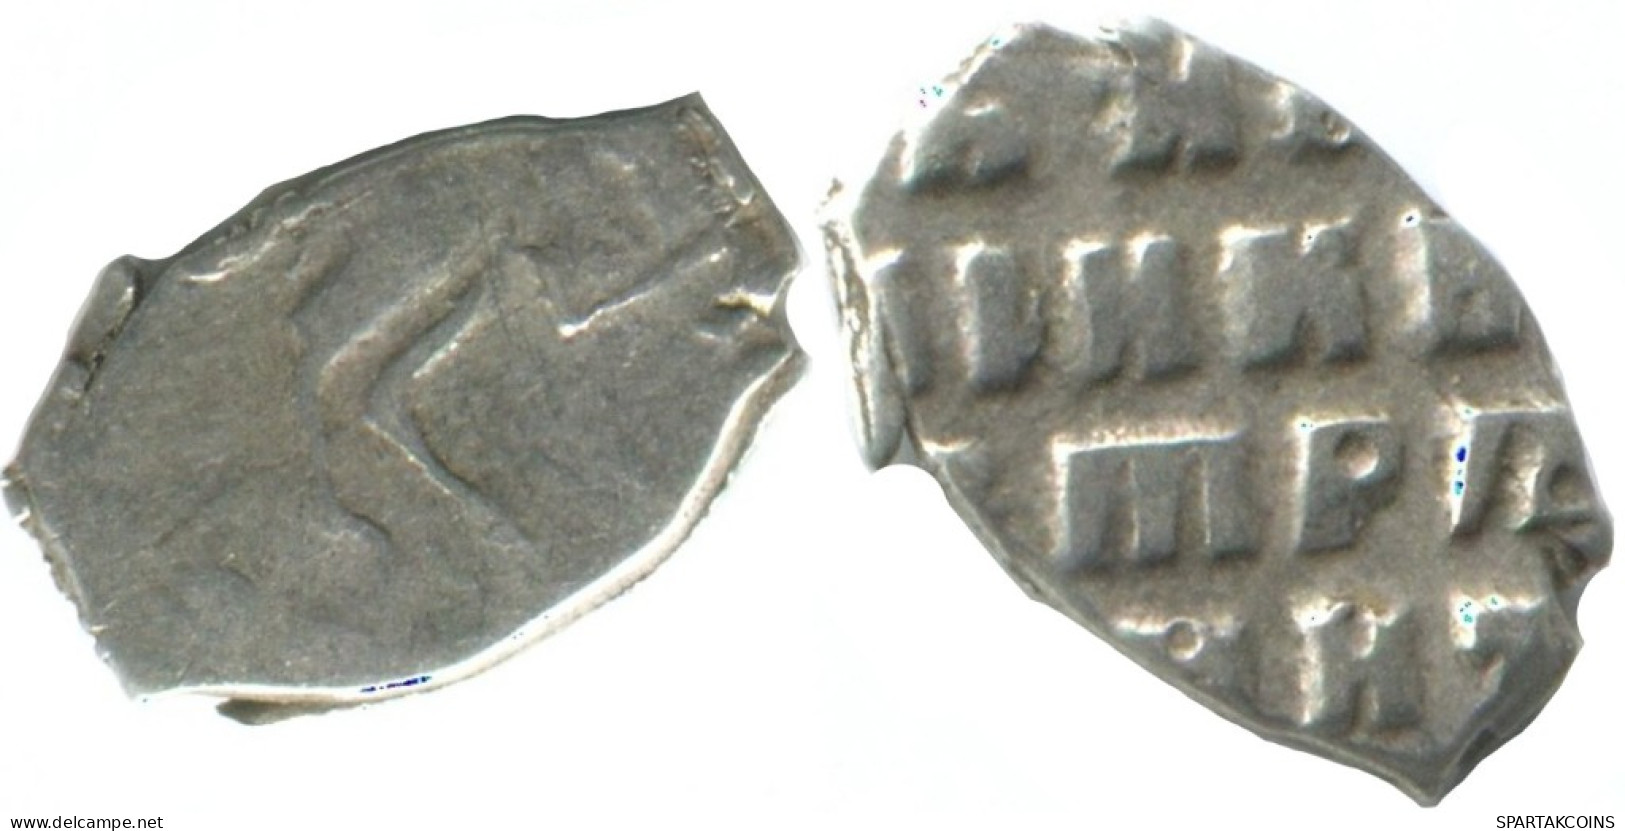 RUSSIE RUSSIA 1696-1717 KOPECK PETER I ARGENT 0.4g/9mm #AB810.10.F.A - Russie